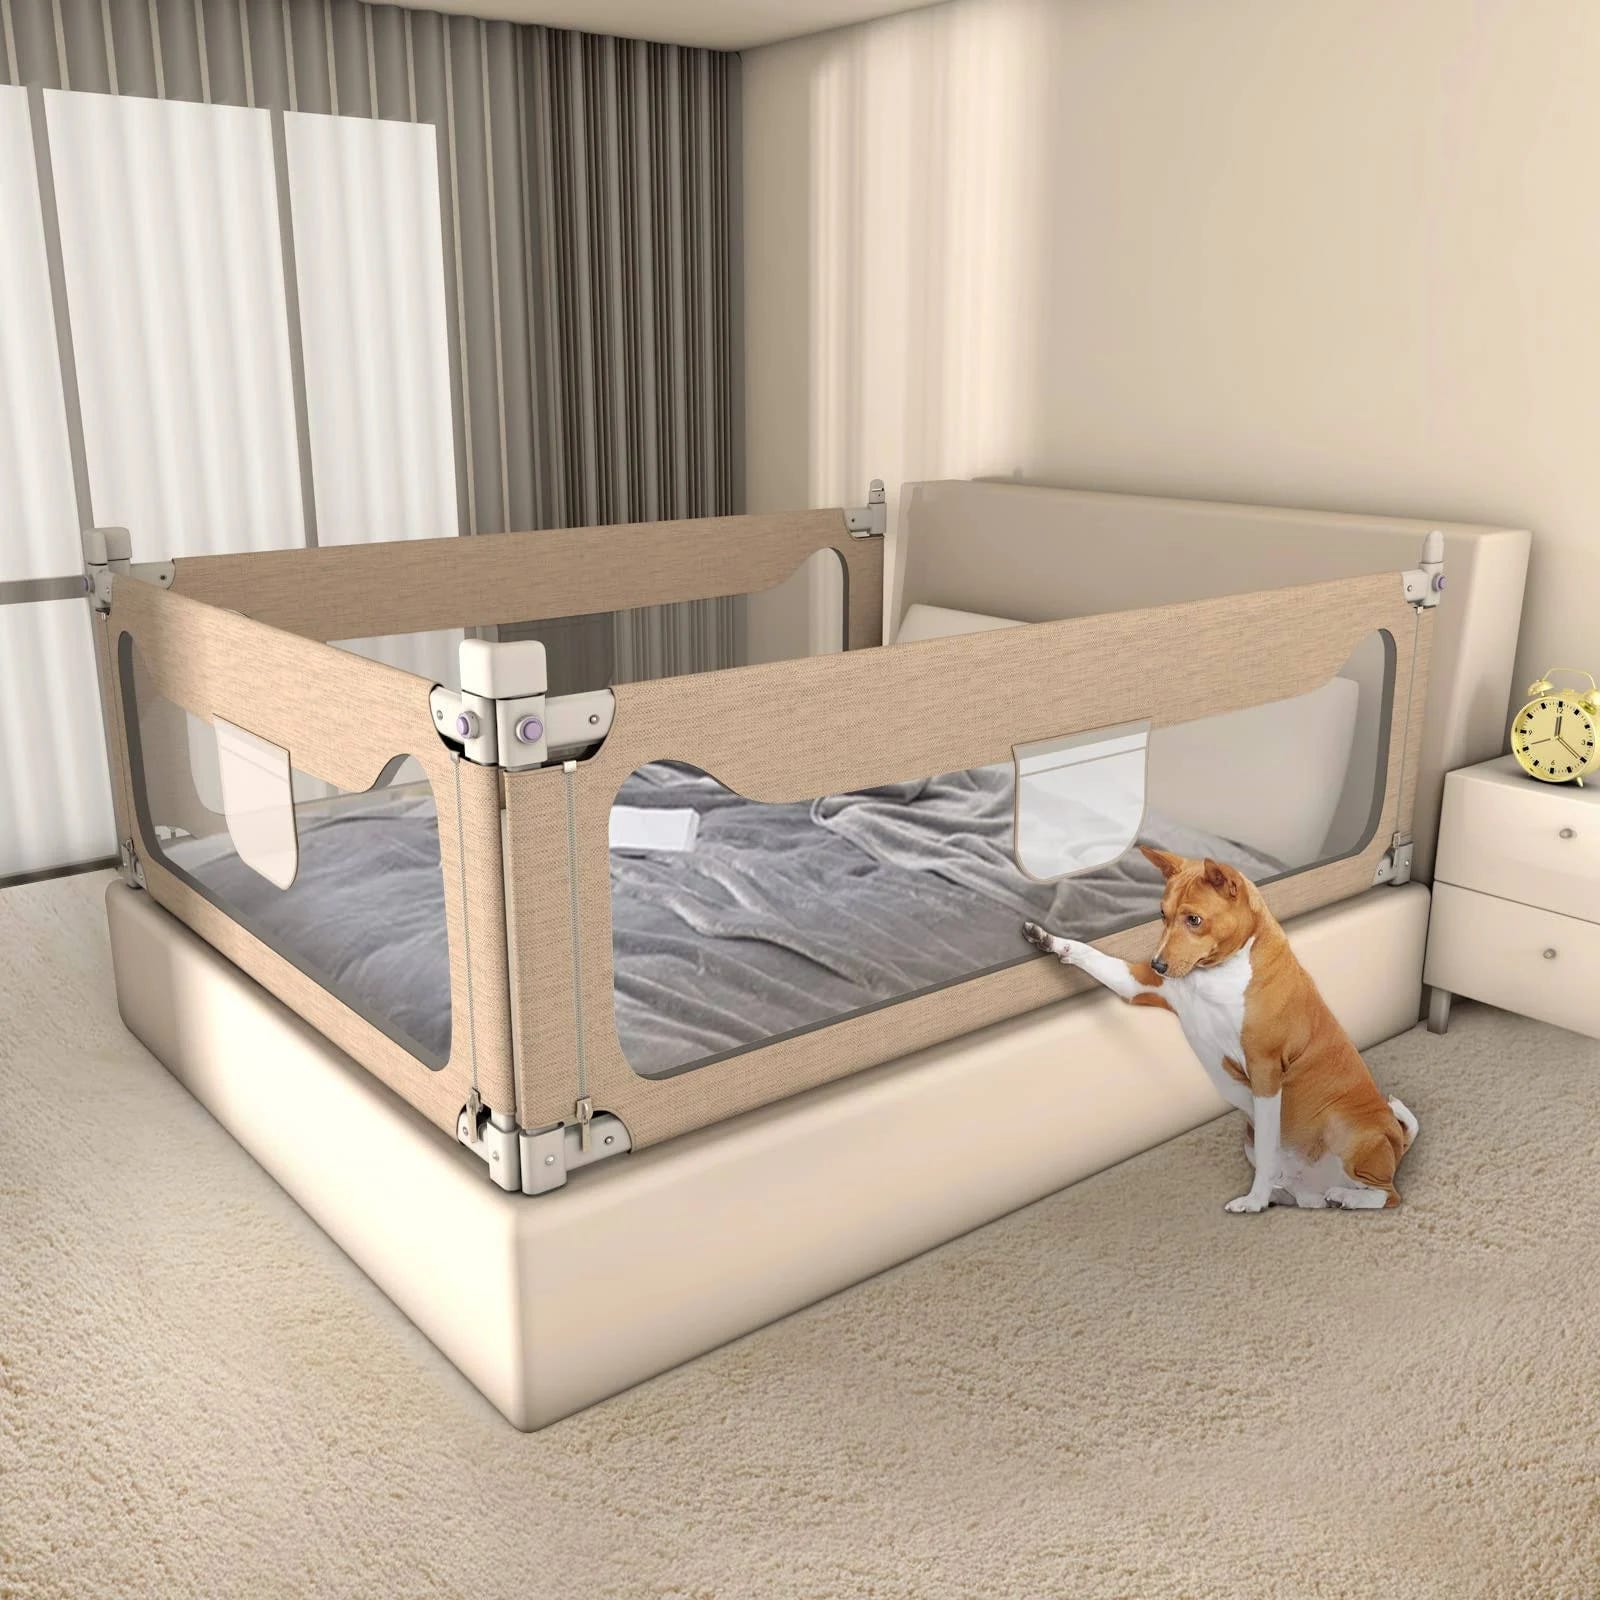 Extra Tall Safety Bed Guard Rails for Kids | Image